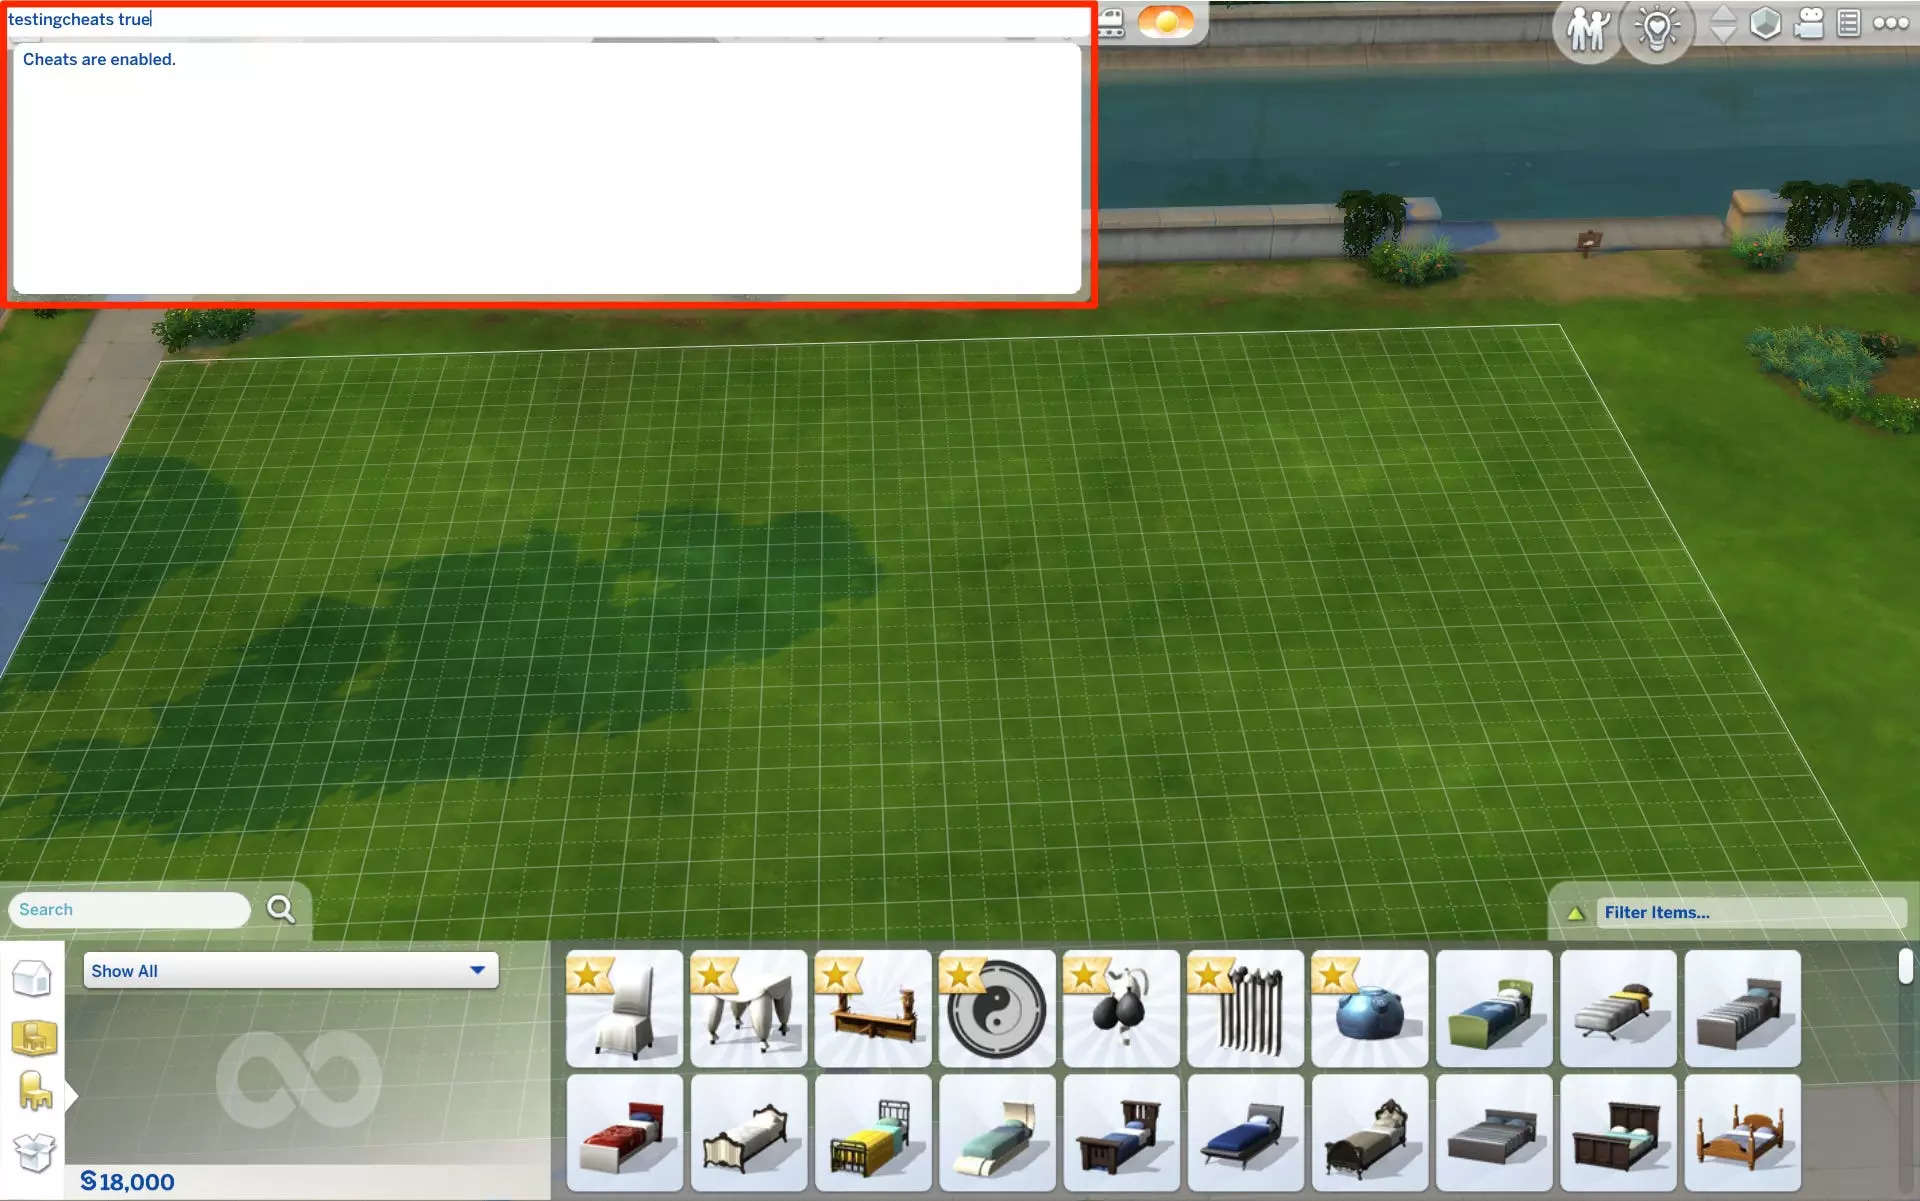 The Sims 4 cheats, All cheat codes and debug options for every occasion